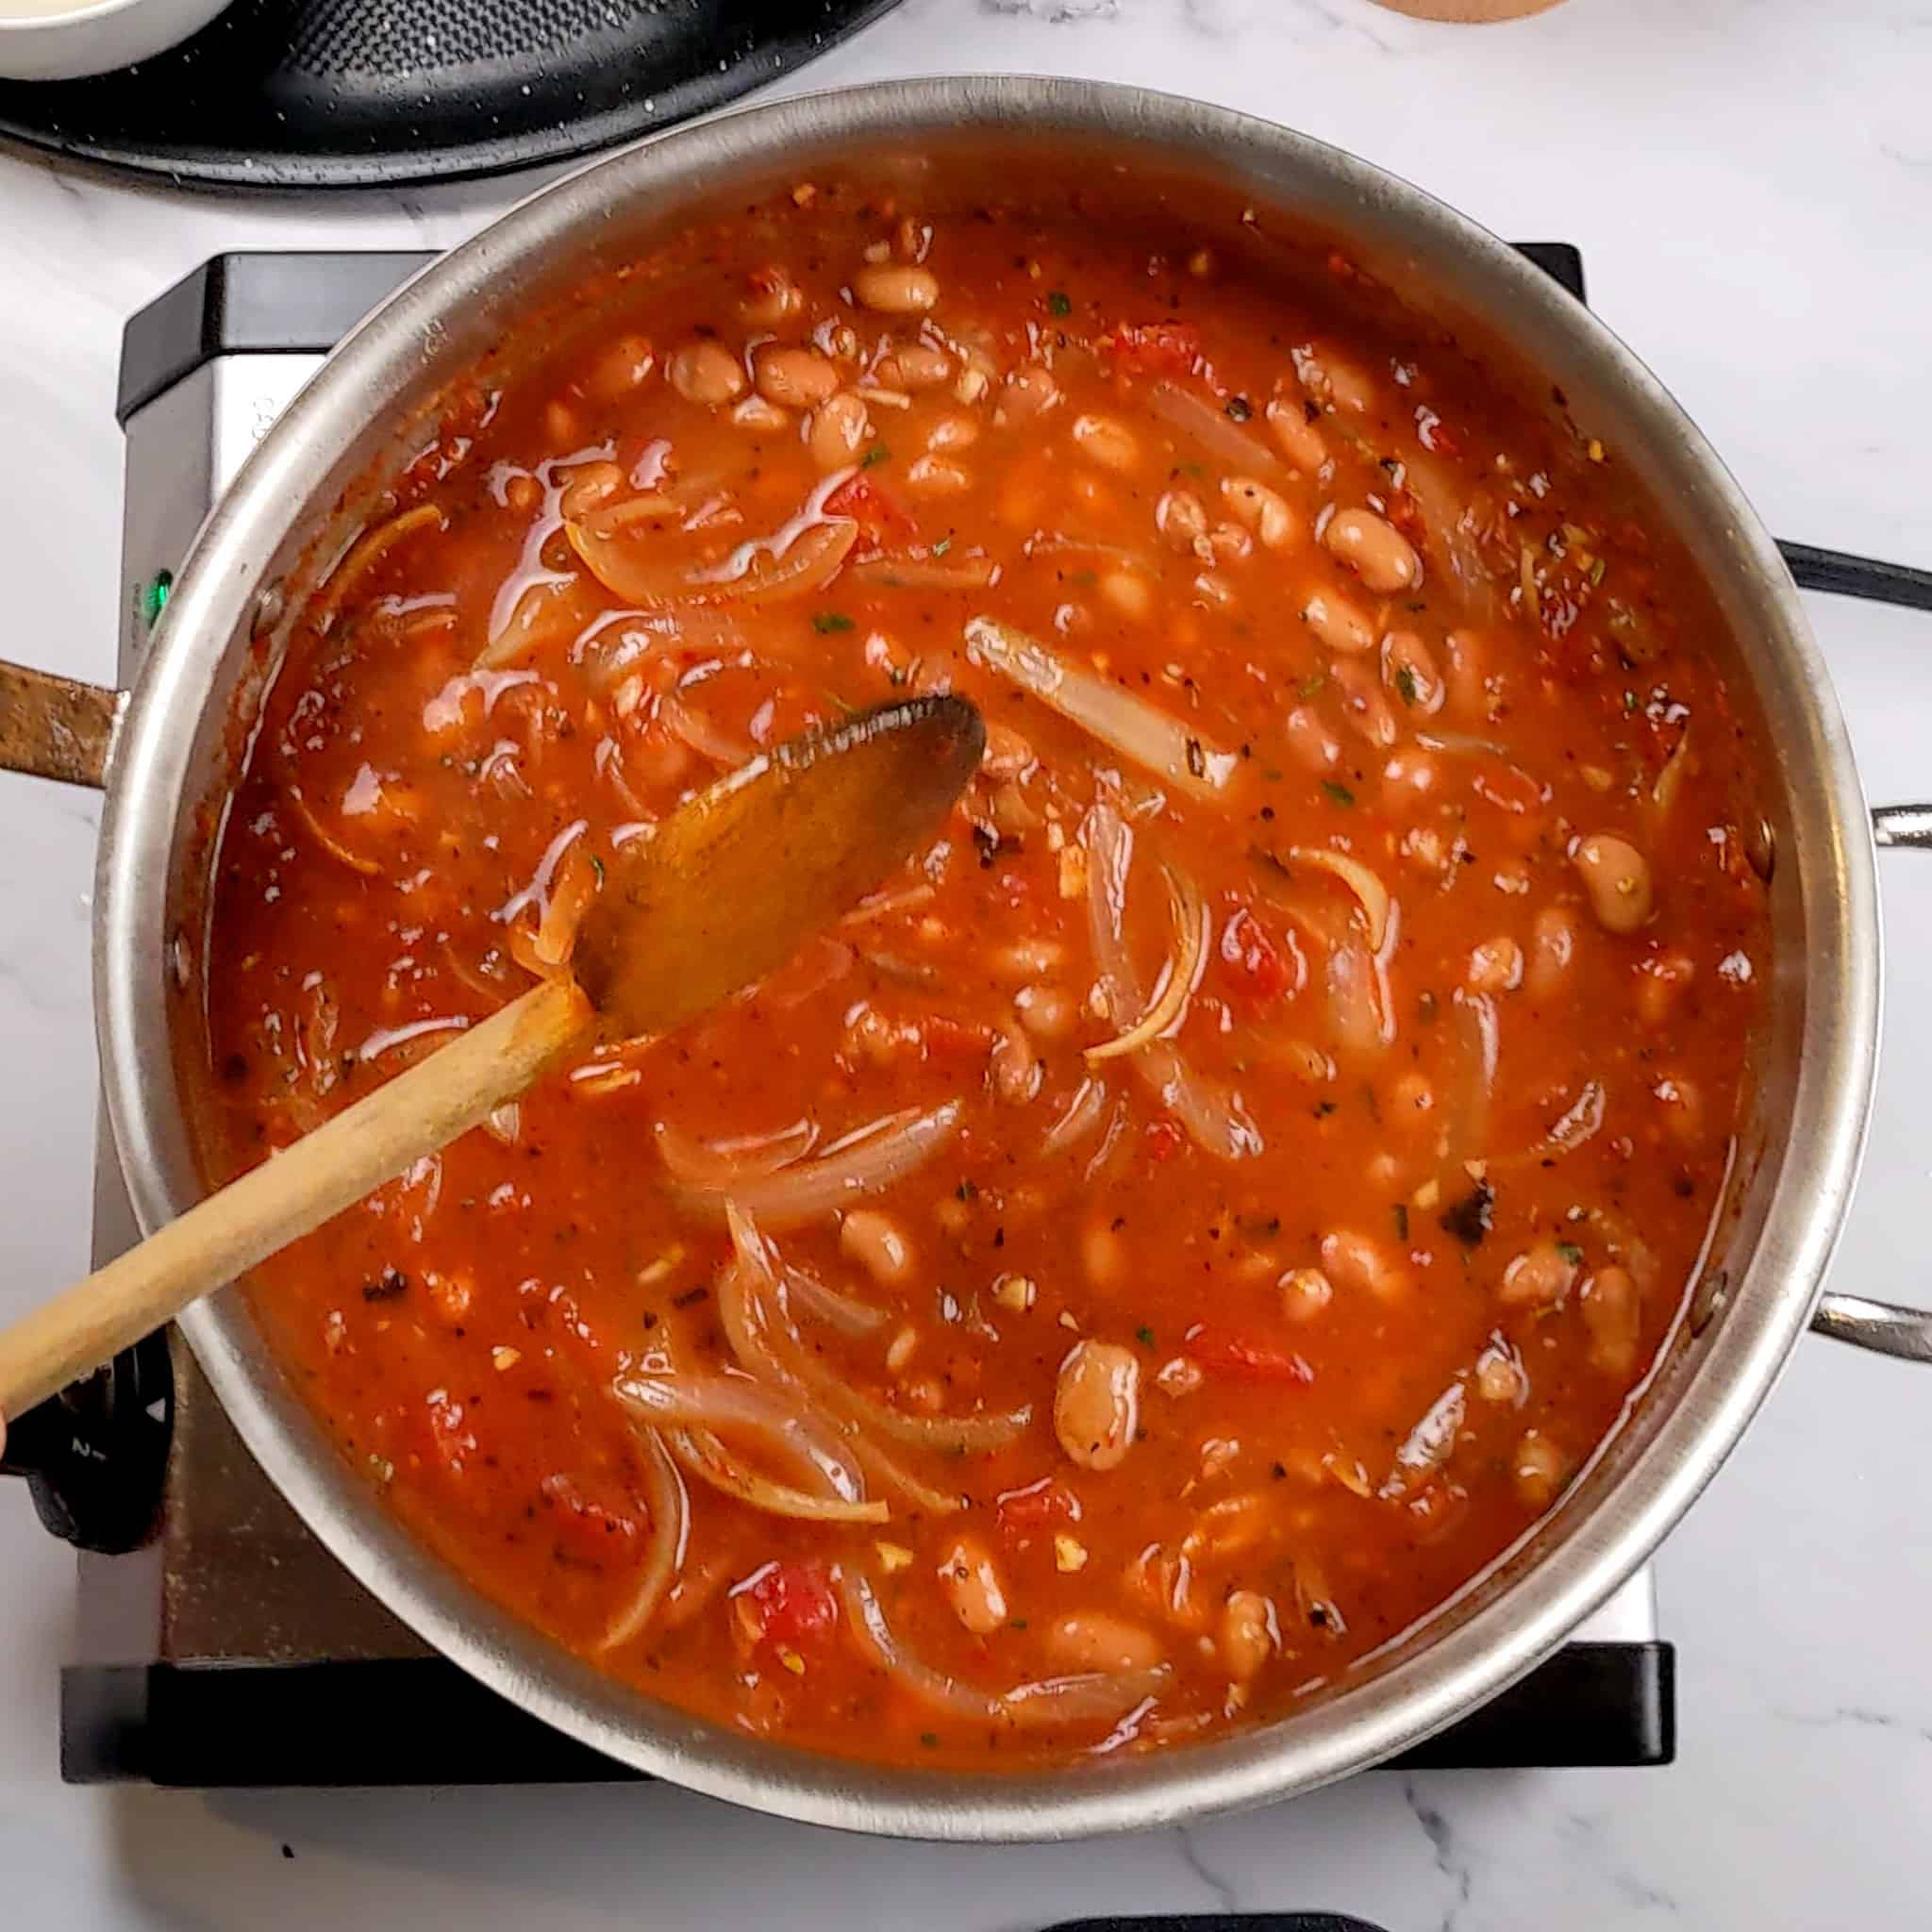 tomato-based onion and bean saute being mixed with a wooden spoon in an all-clad stainless steel saute pan